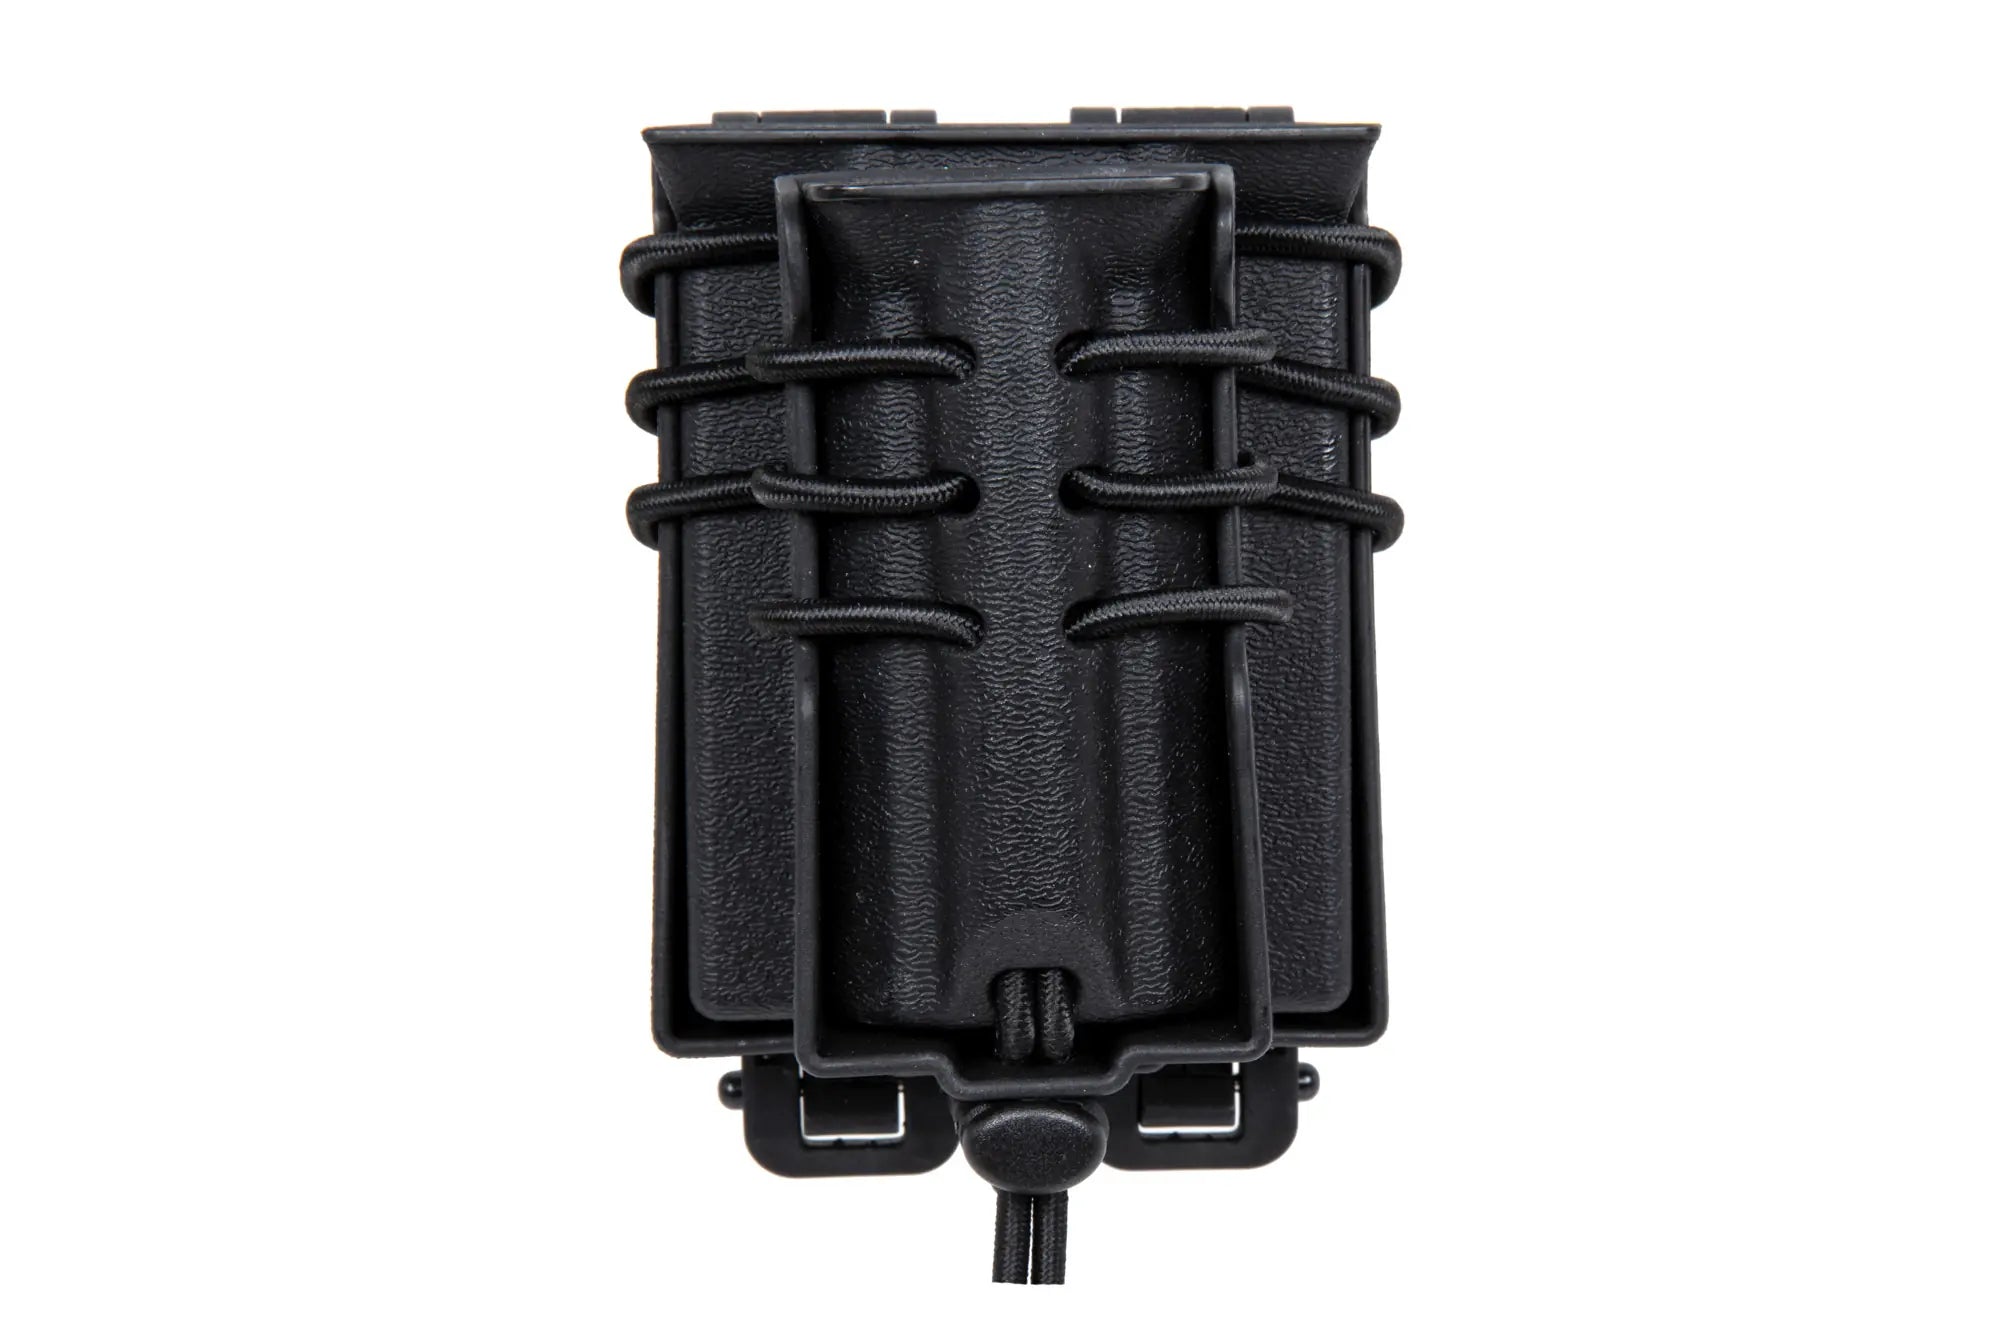 Carrier for 2 M4/M16 and 9mm magazines Wosport Urban Assault Quick Pull Black